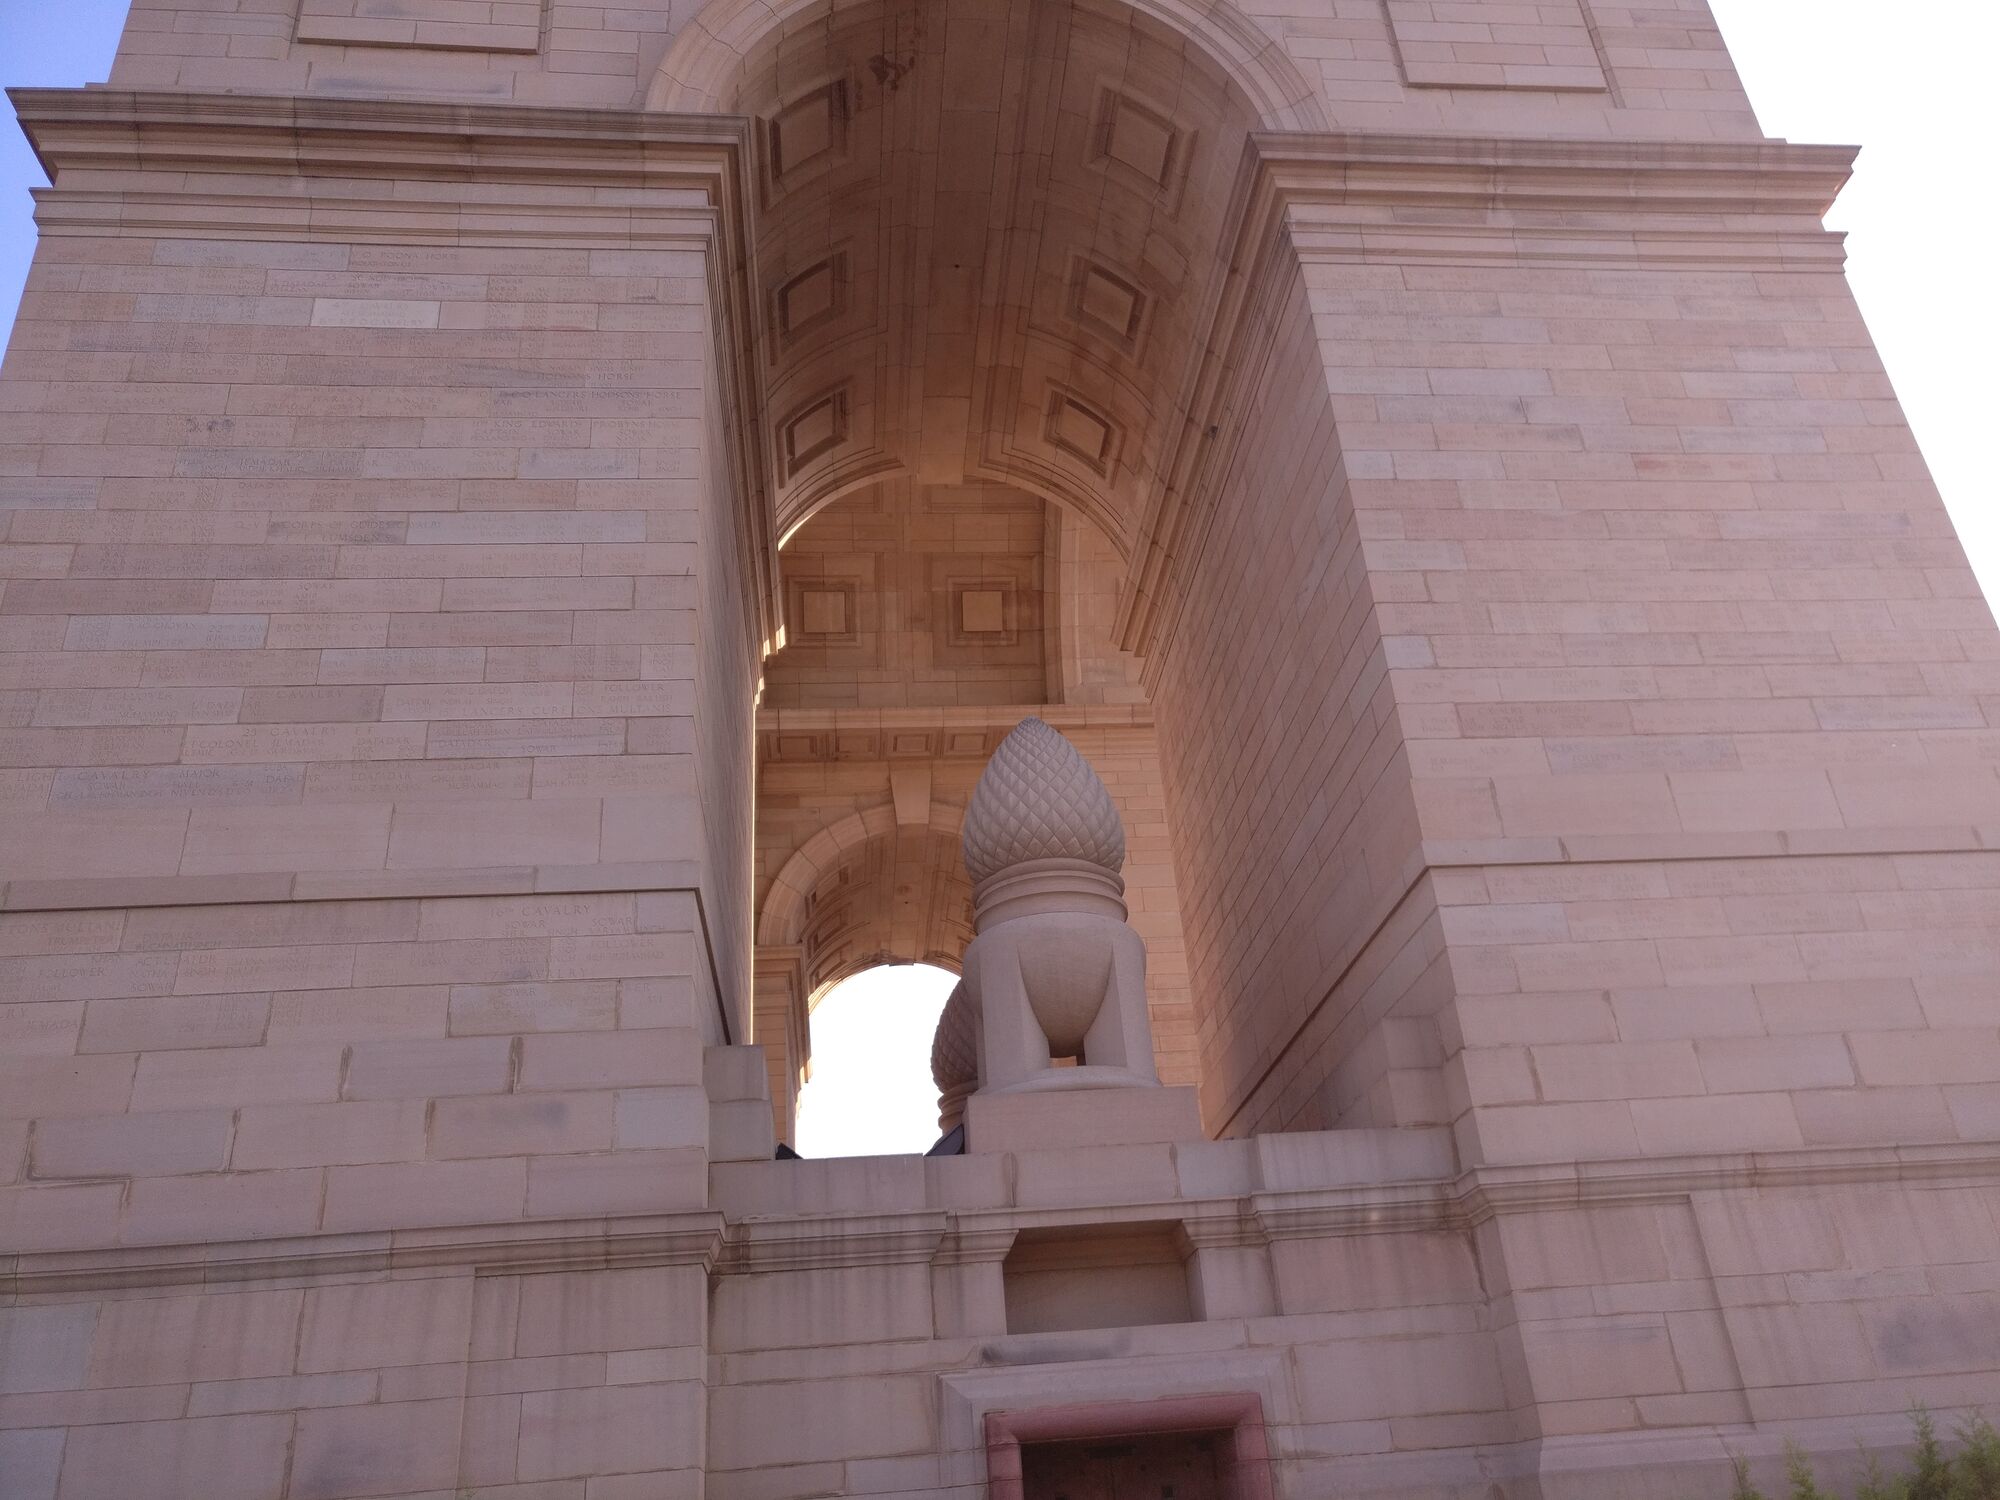 The memorial-gate was designed by Sir Edwin Lutyens, who was not only the main architect of New Delhi